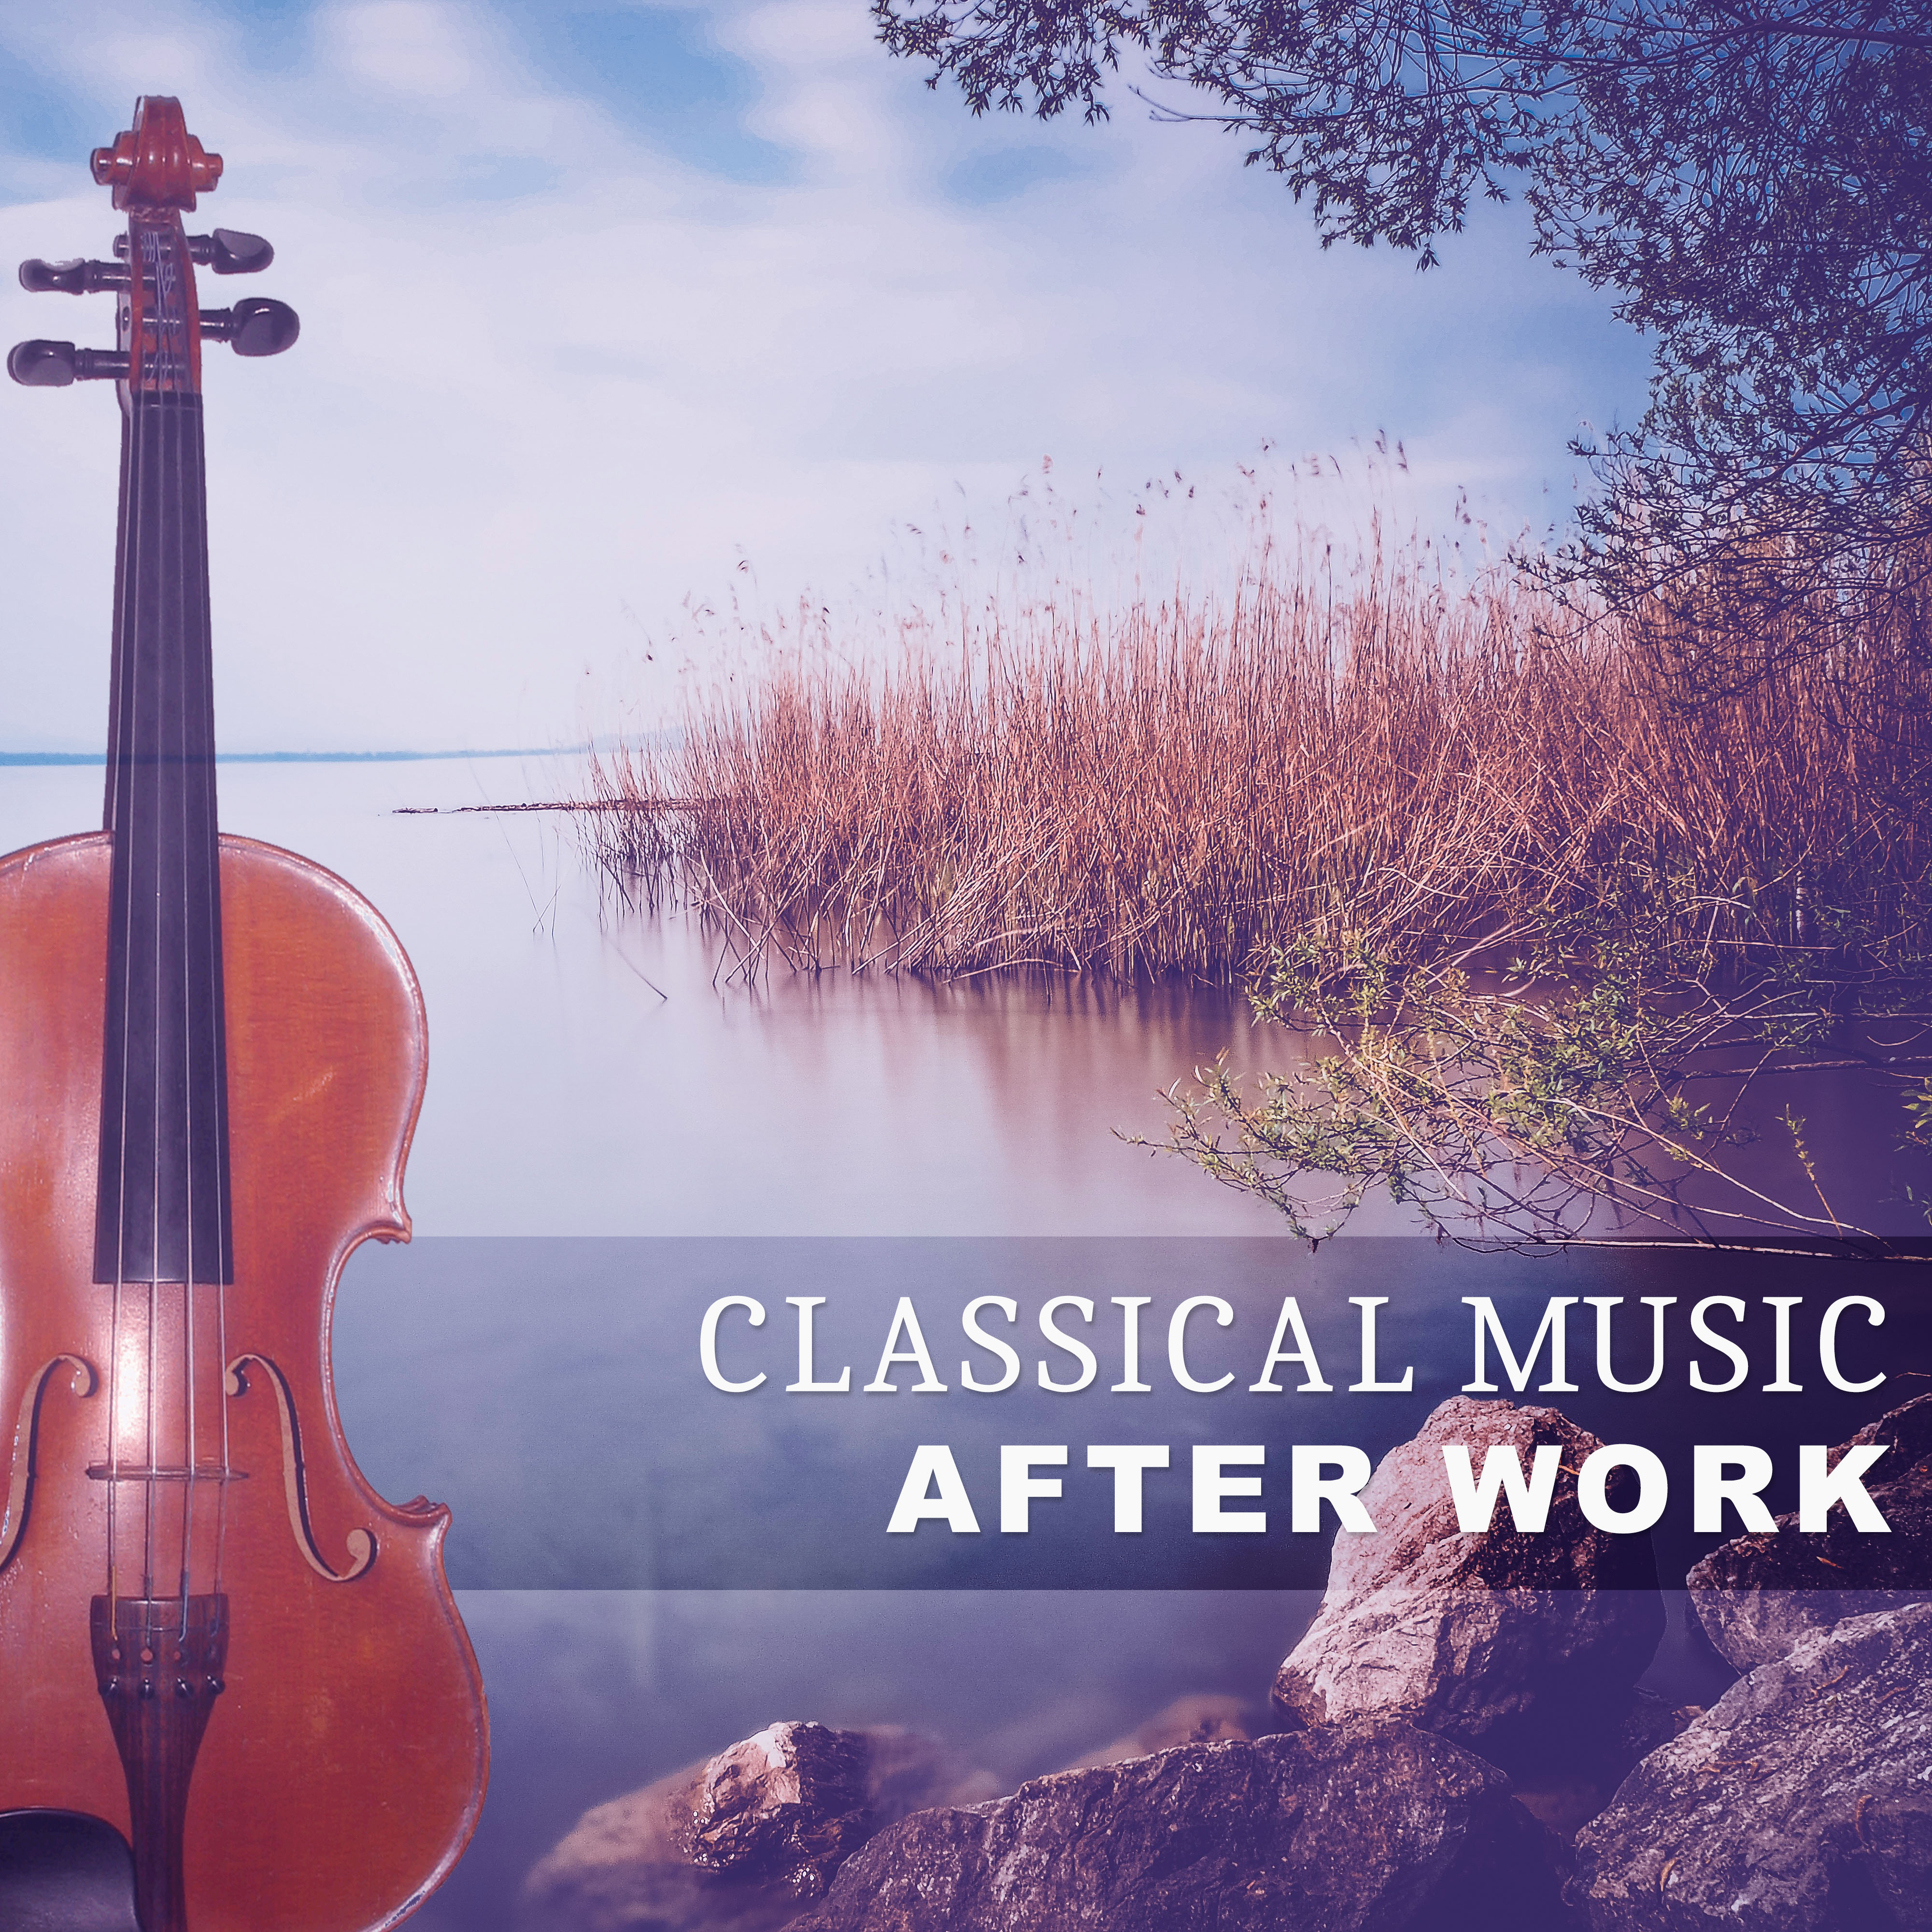 Classical Music After Work  Calm Music, Beethoven Songs, Music for Soul, Mozart, Bach